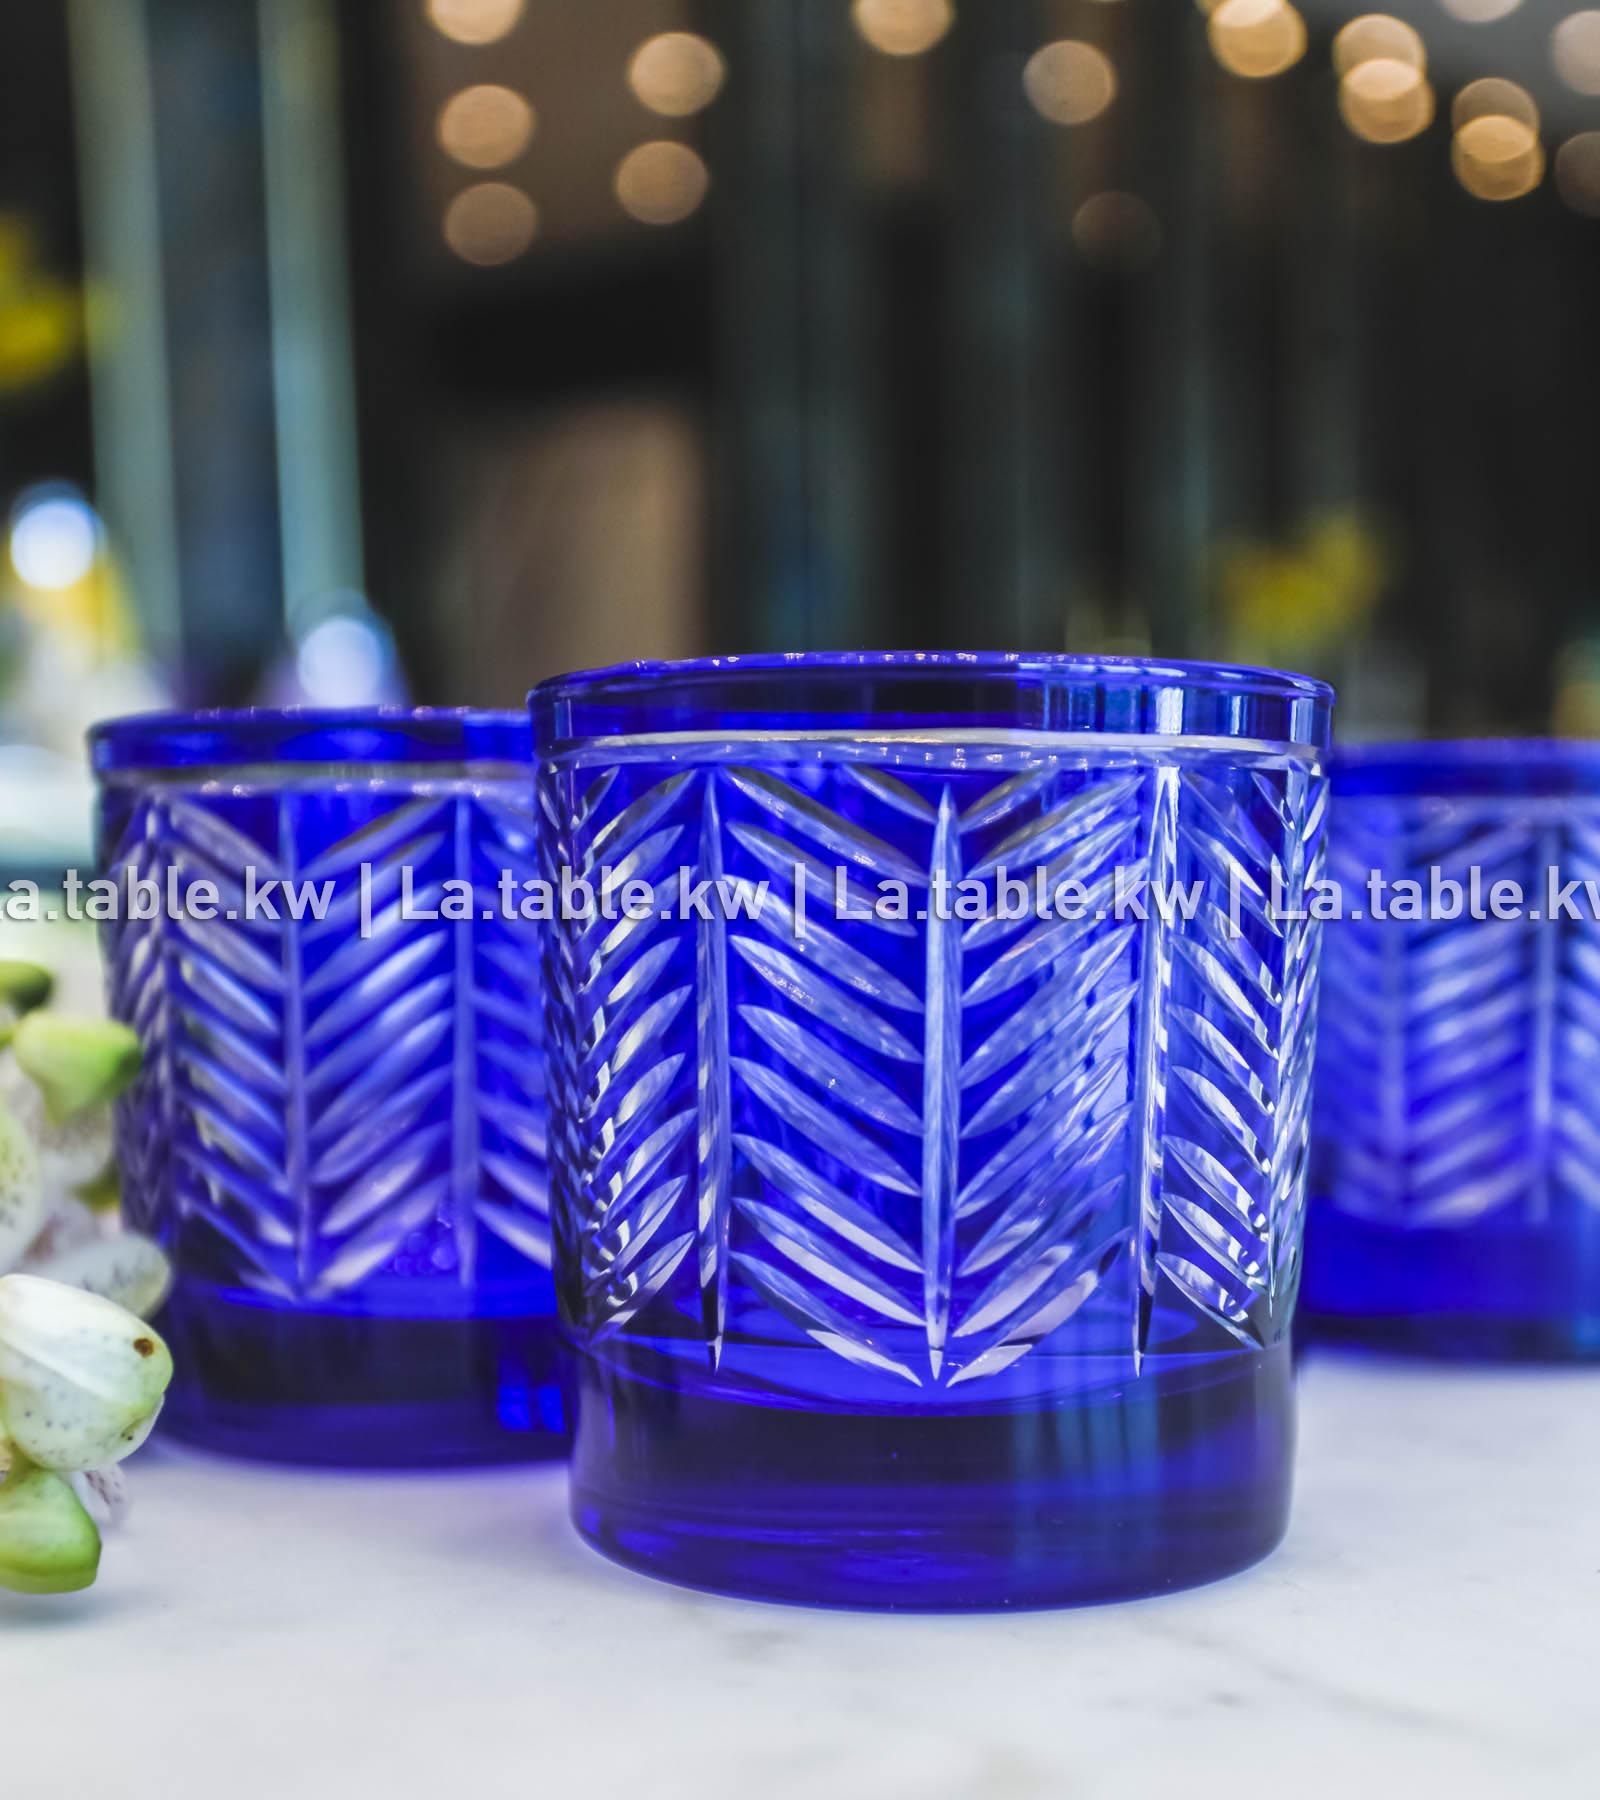 Royal Blue Spider Water Glasses